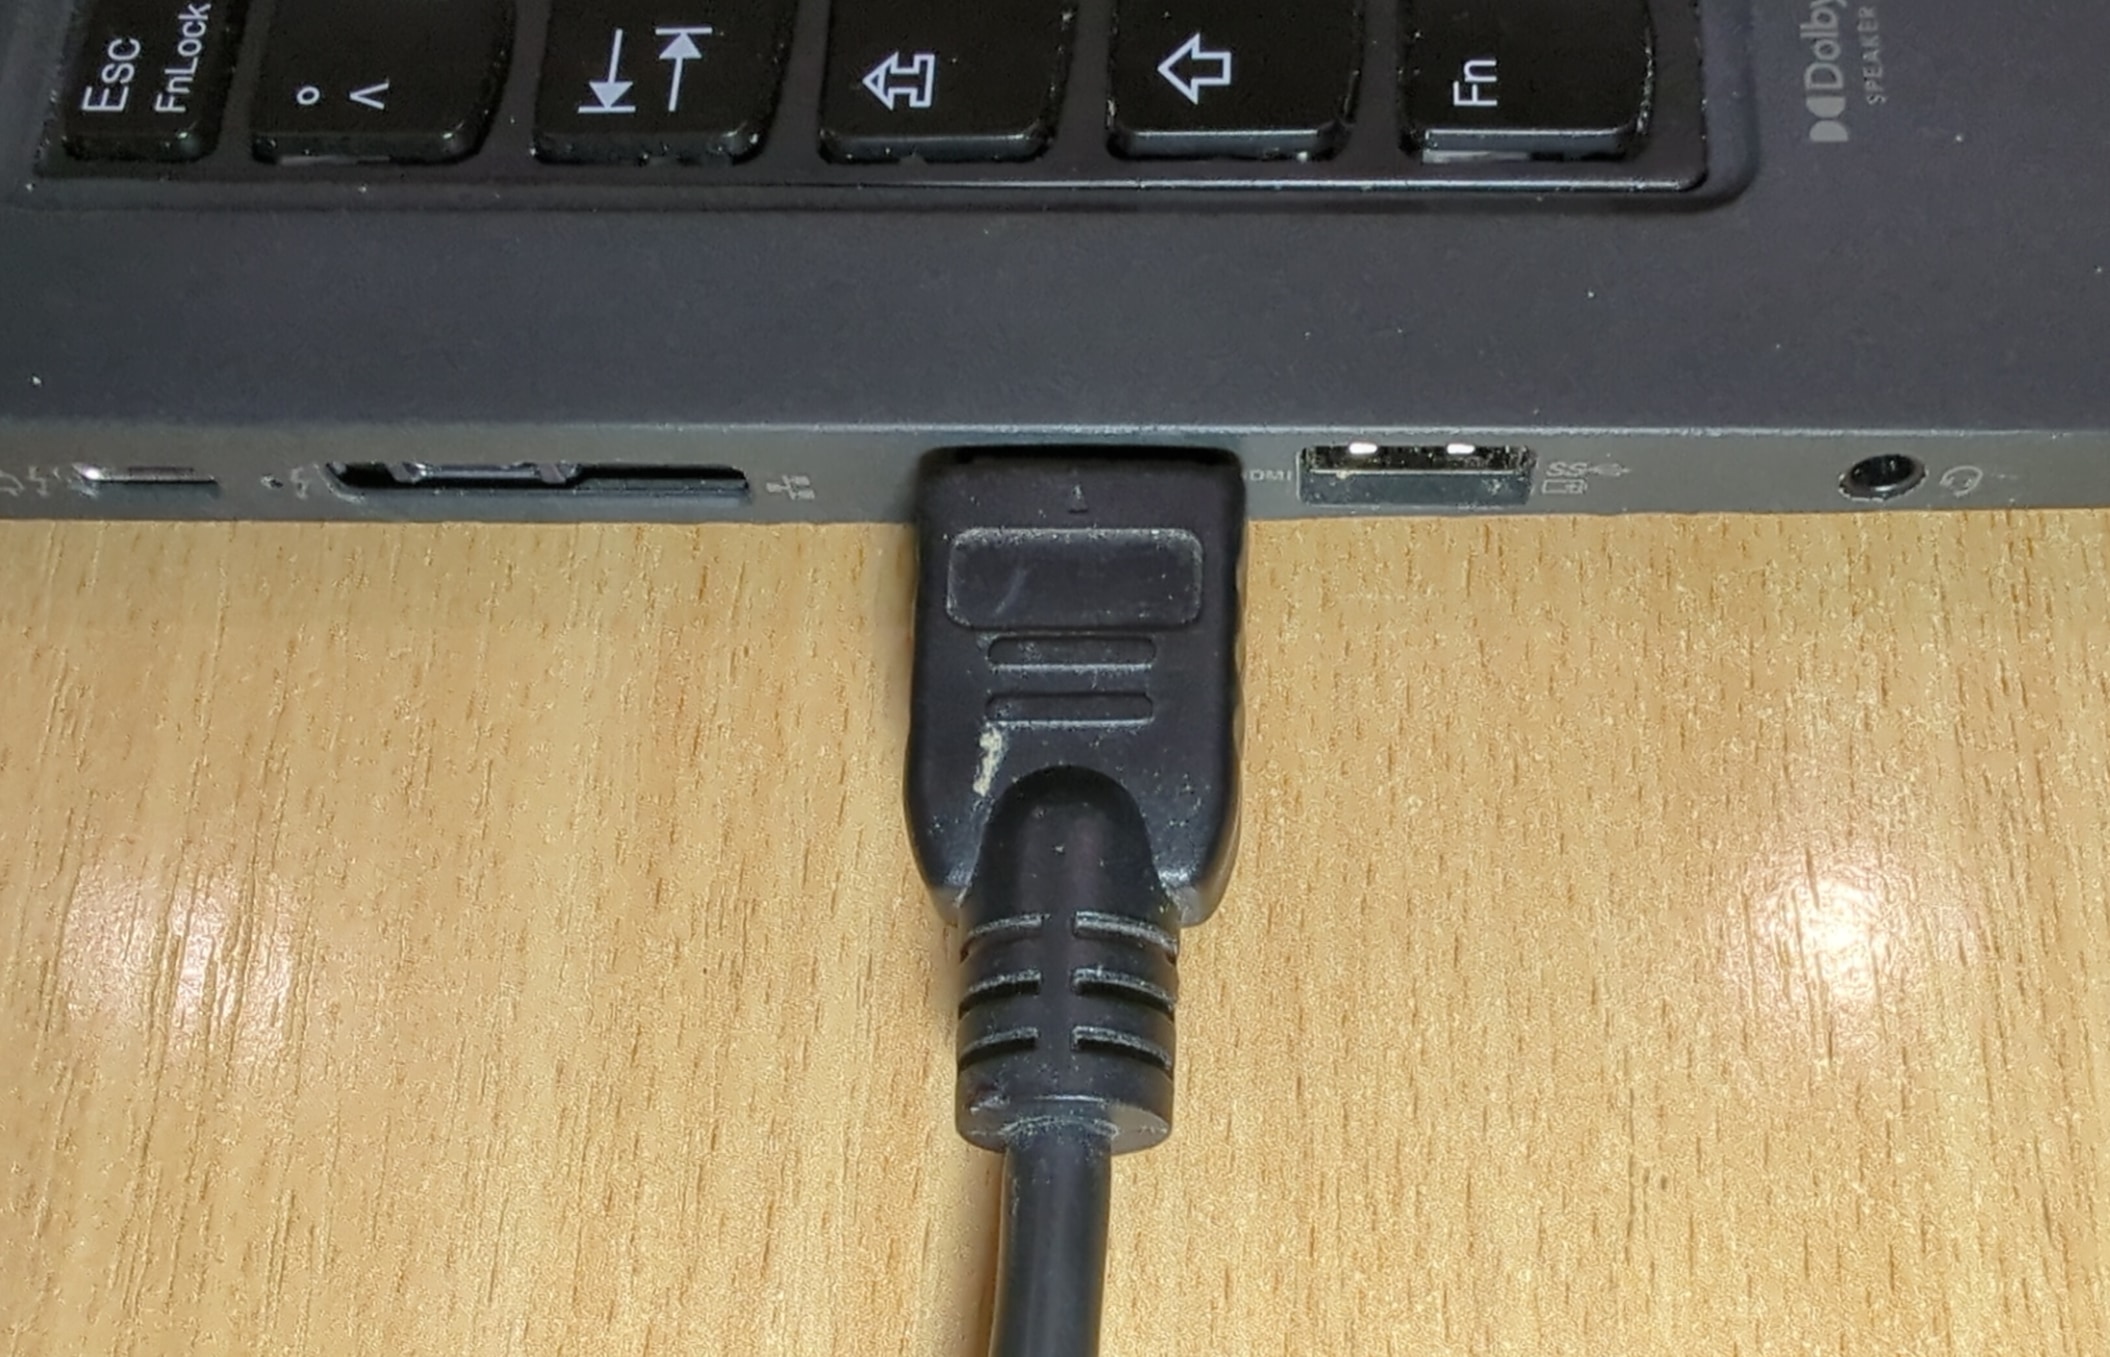 HDMI cable connected to the laptop (will act as a monitor in target system).